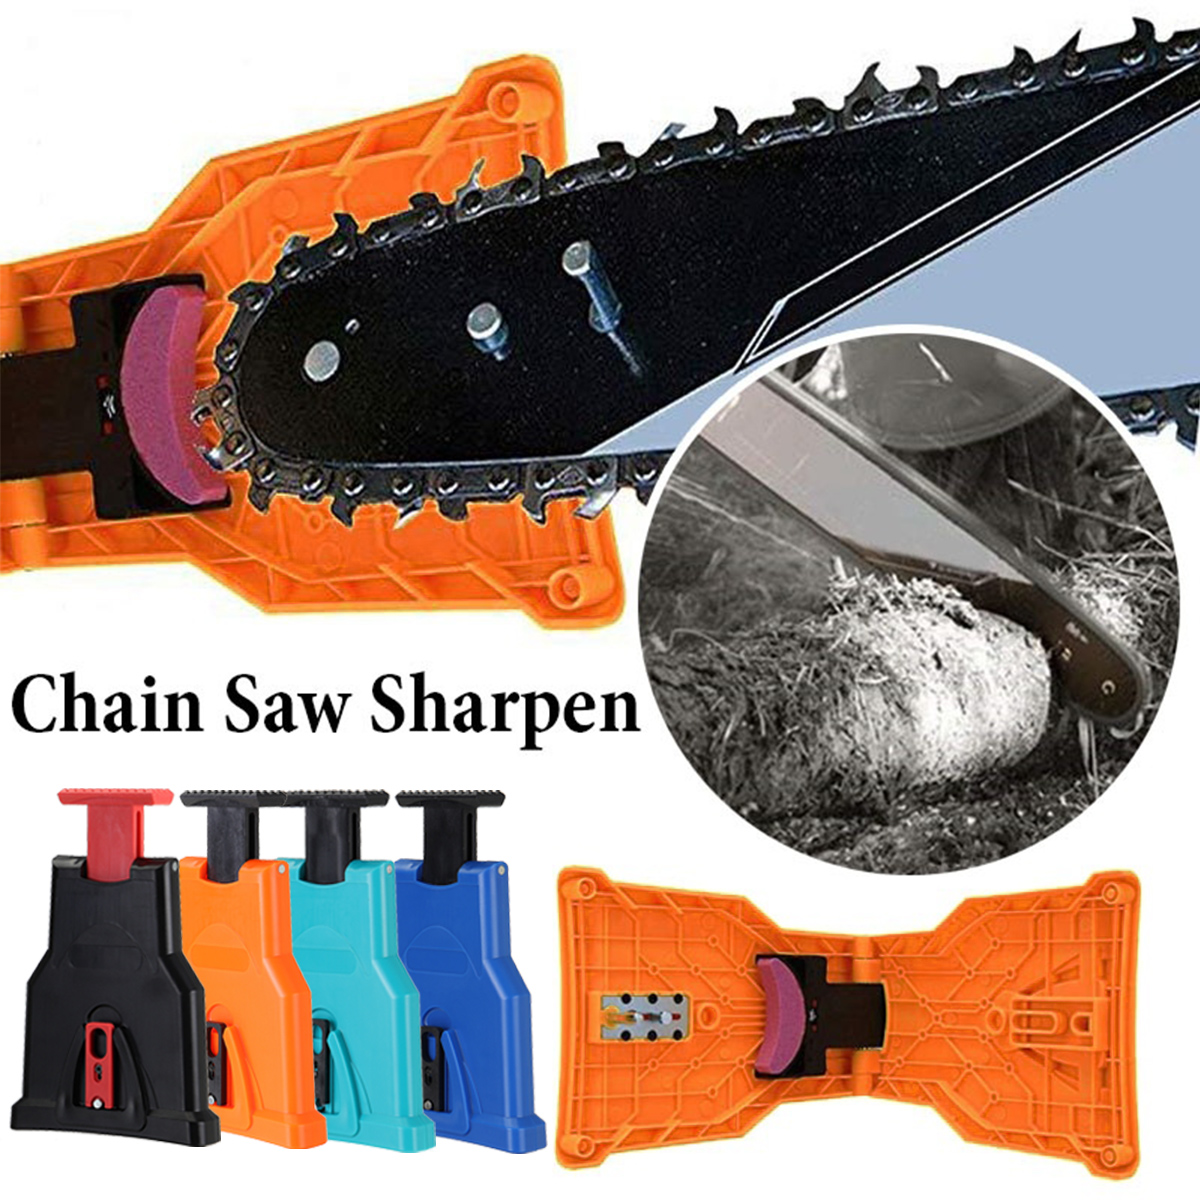 Chainsaw-Teeth-Sharpener-Grinding-Stone-for-Electric-Power-Grinder-Chain-Saw-Woodworking-Tool-1598058-1